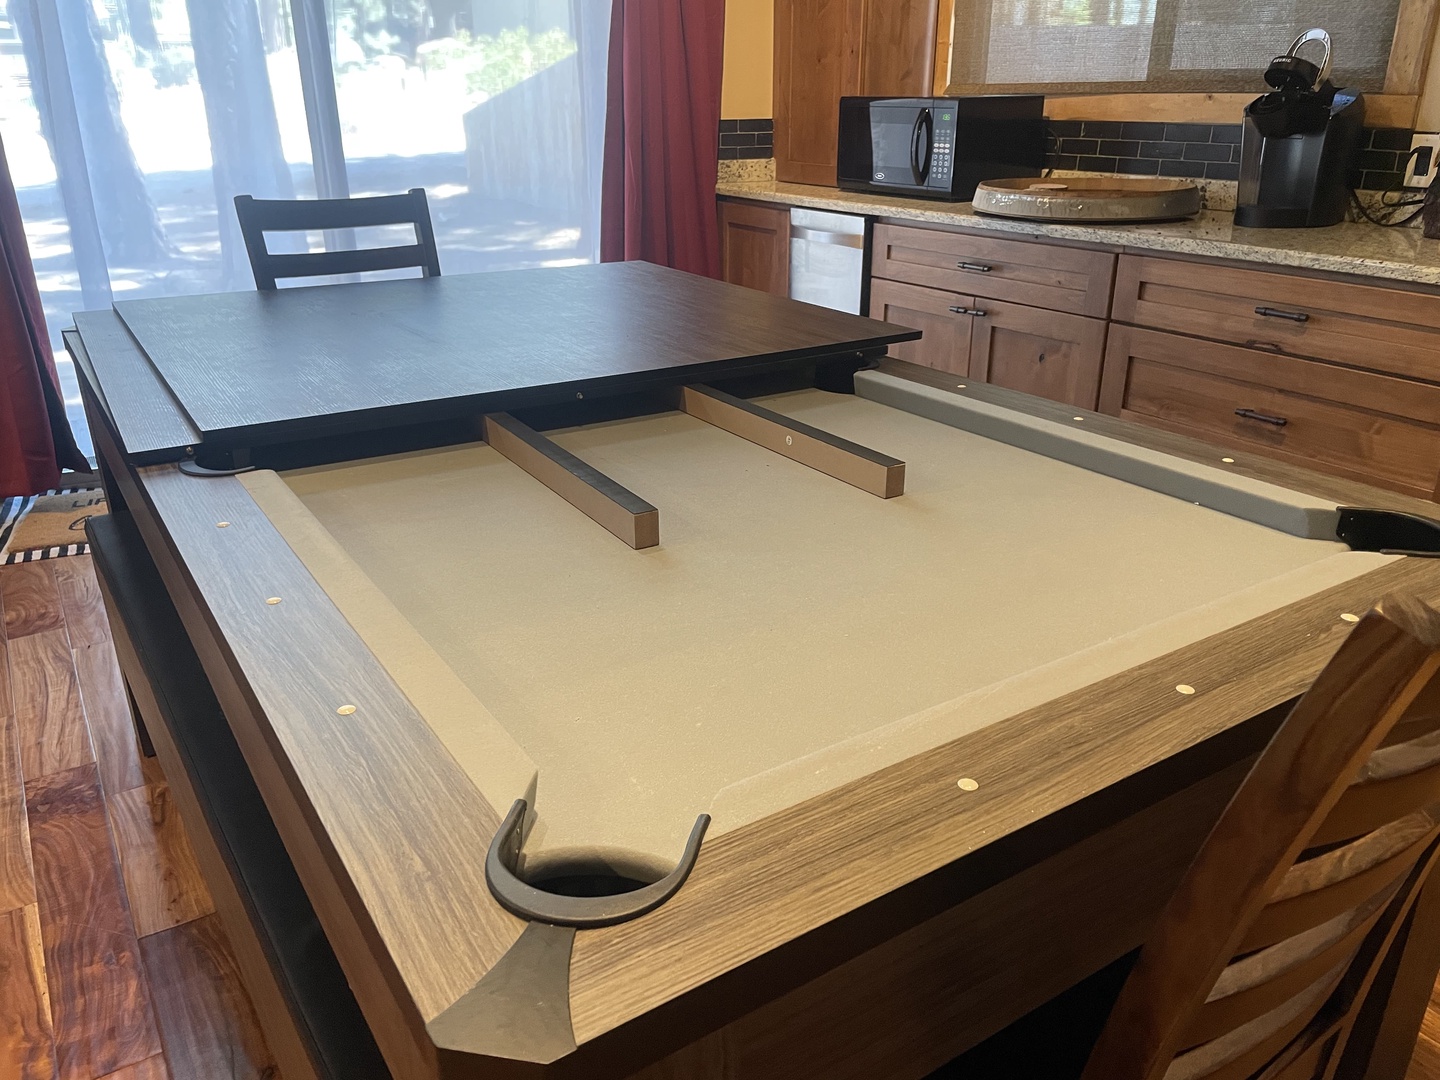 Dining table converts to a pool table!